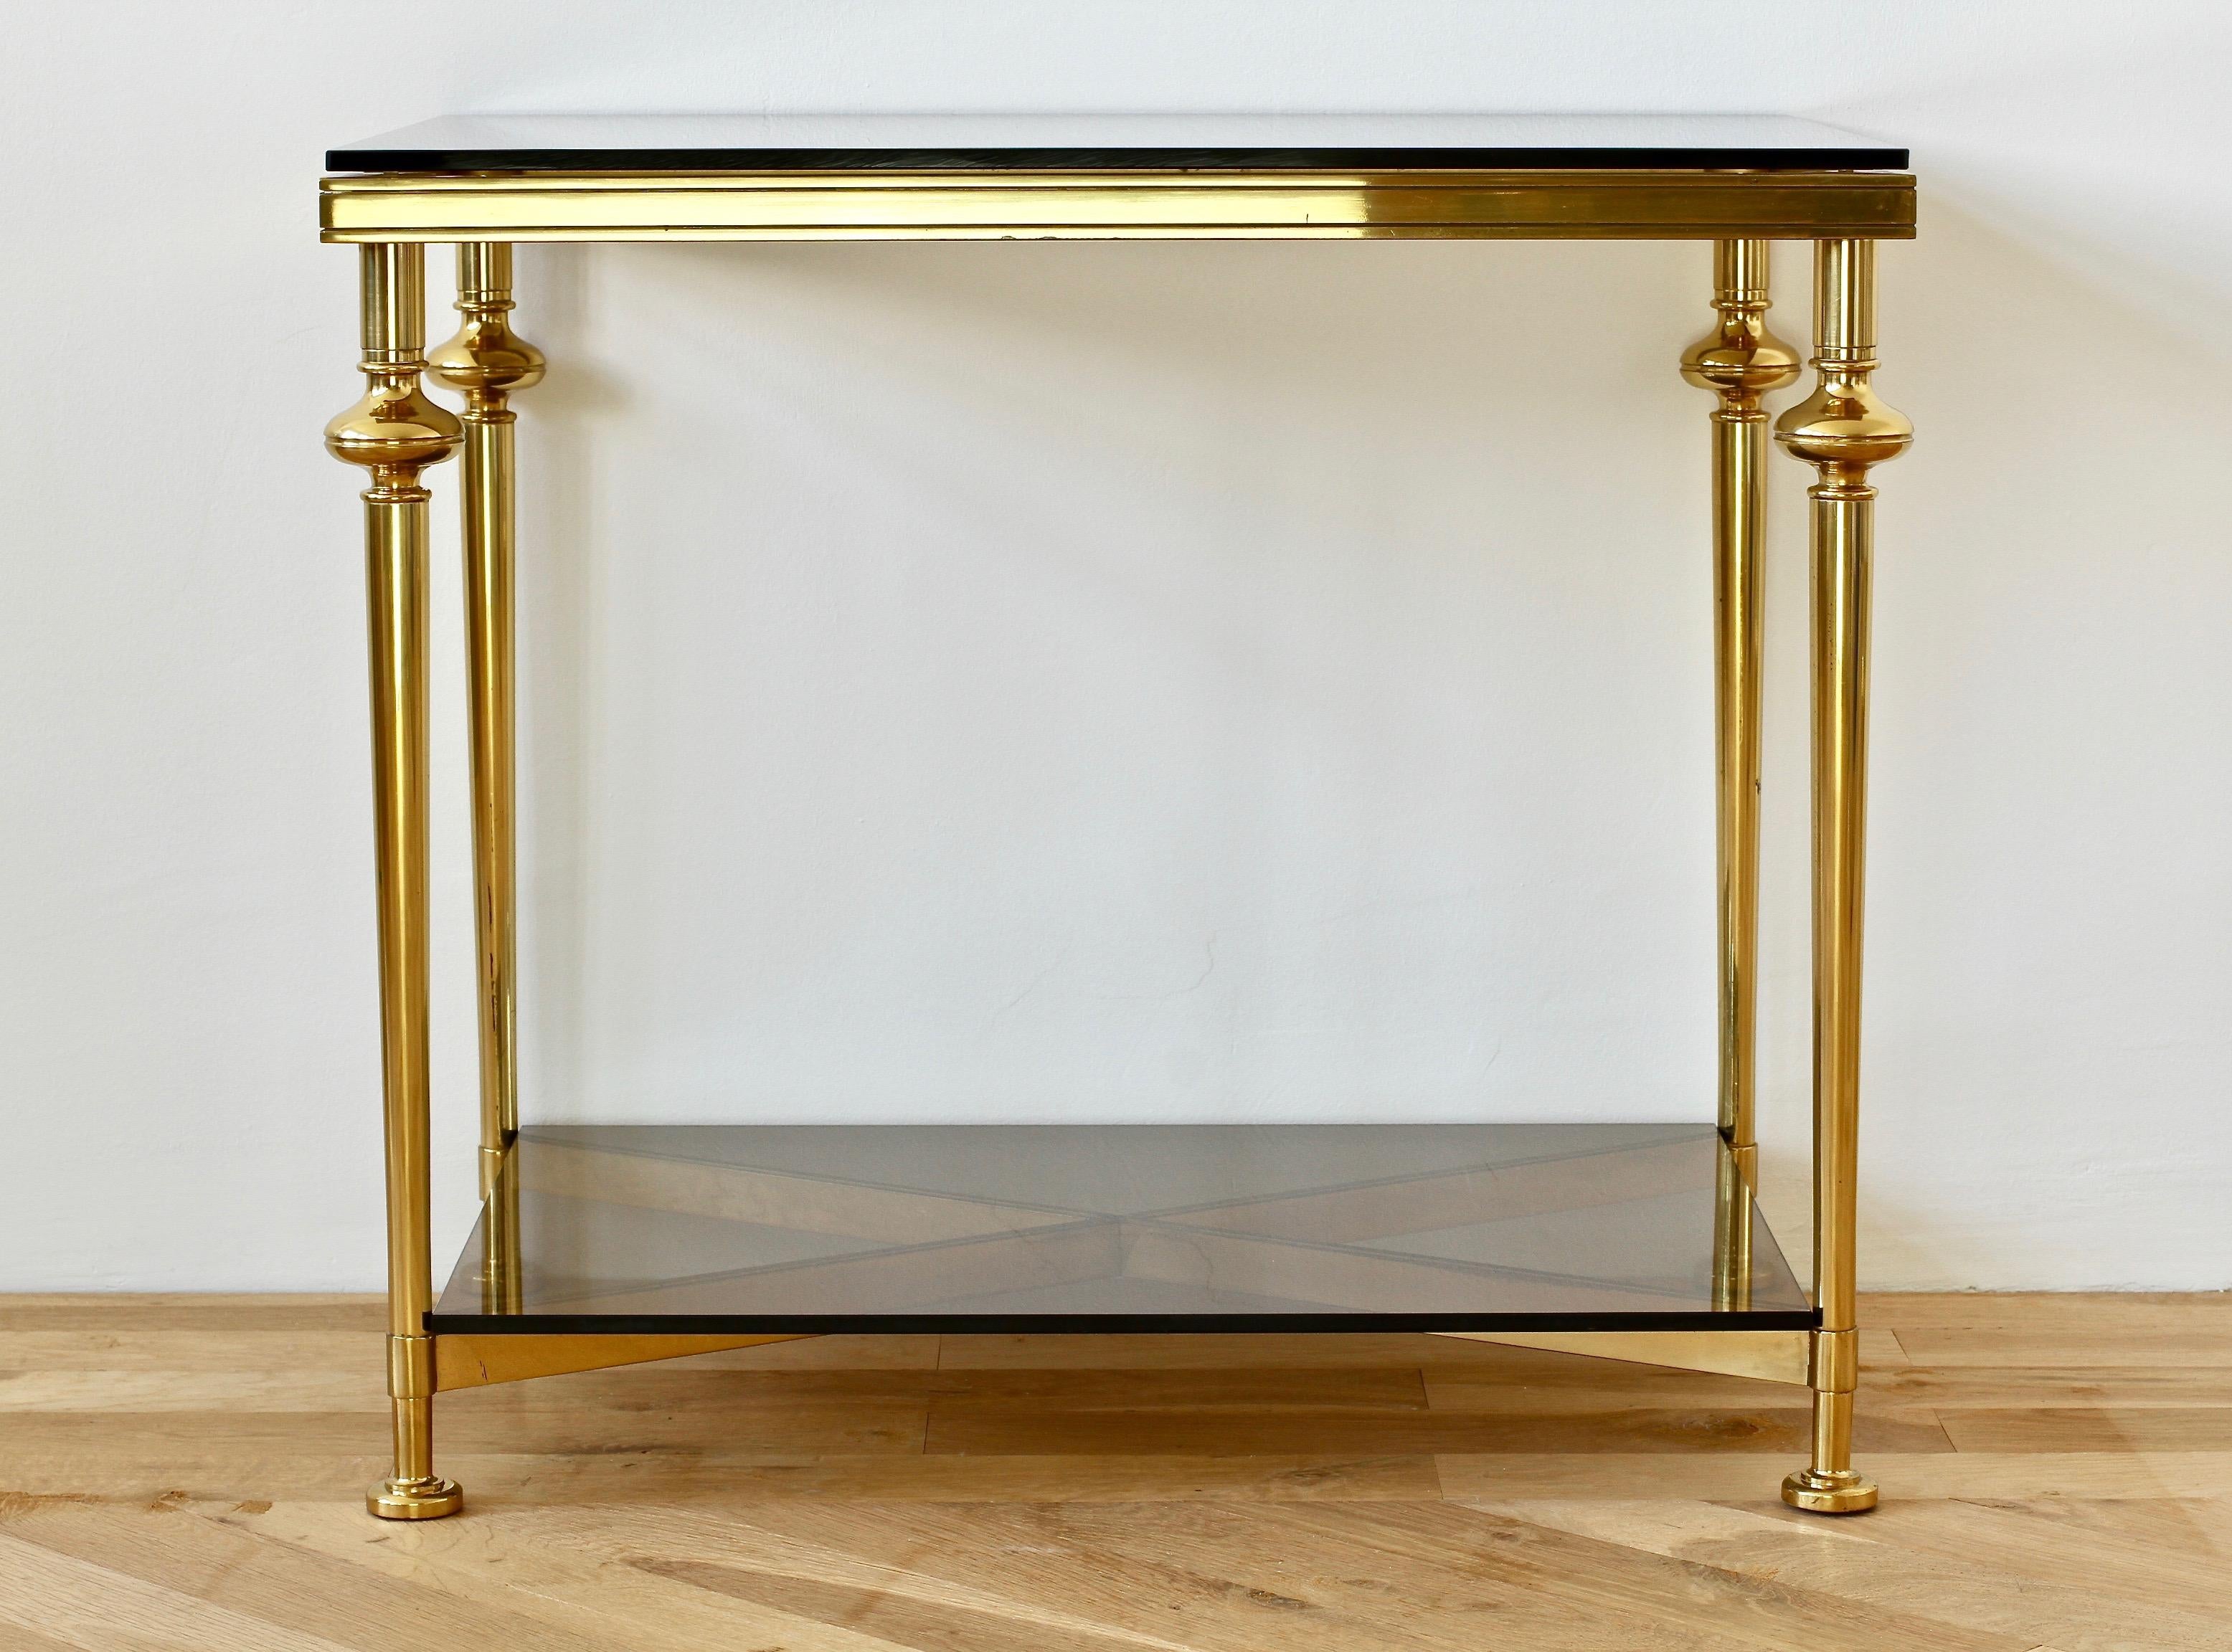 A wonderful side or end table in the style of Maison Jansen, circa 1970. Made from solid cast brass in the modern neoclassical style and featuring two dark toned smoked glass tabletops and crossed X-base. This delightful table, not dissimilar to